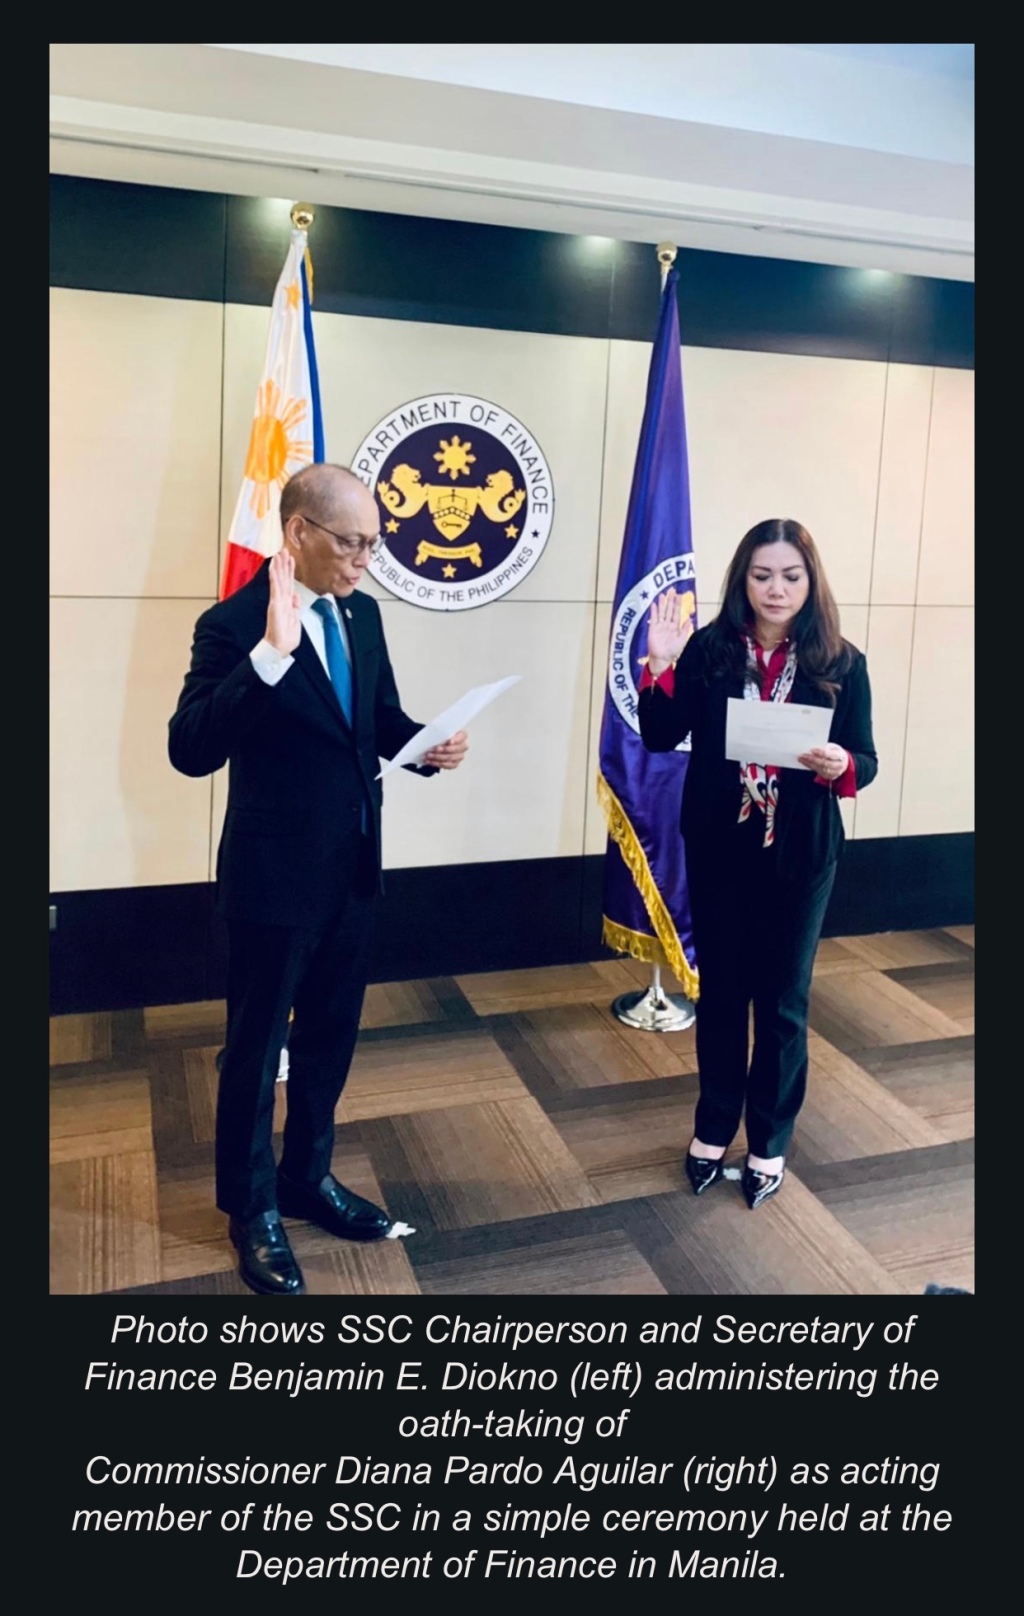 SSS announces appointment of Diana Pardo Aguilar as acting member of Social Security Commission